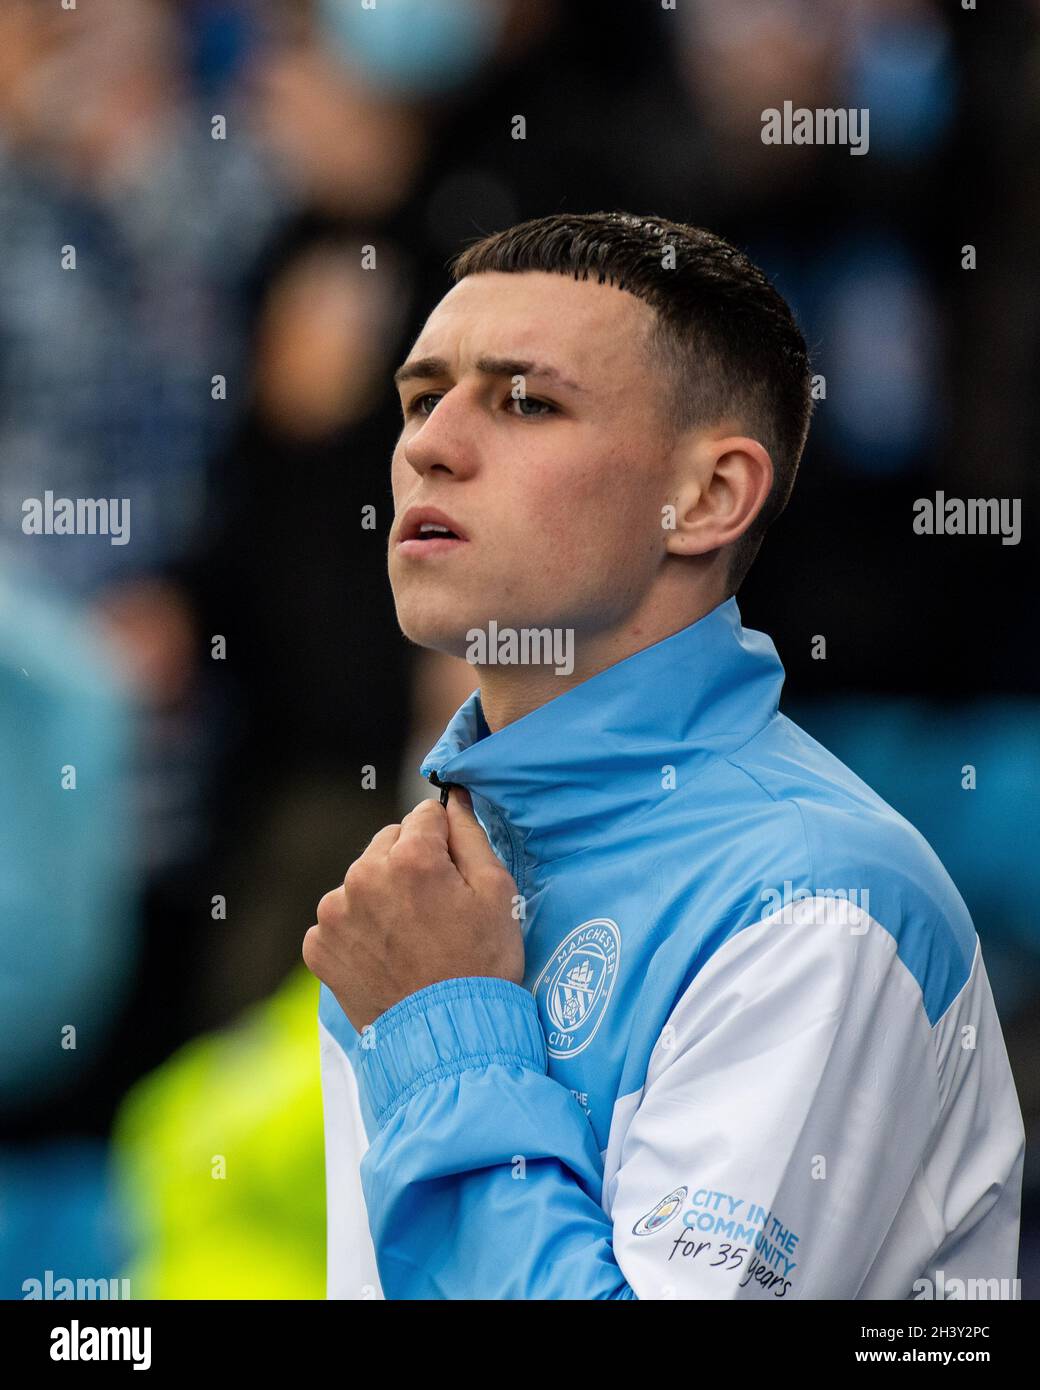 MANCHESTER, ENGLAND - OCTOBER 30: Phil Foden of Manchester City during the Premier League match between Manchester City and Crystal Palace at Etihad S Stock Photo